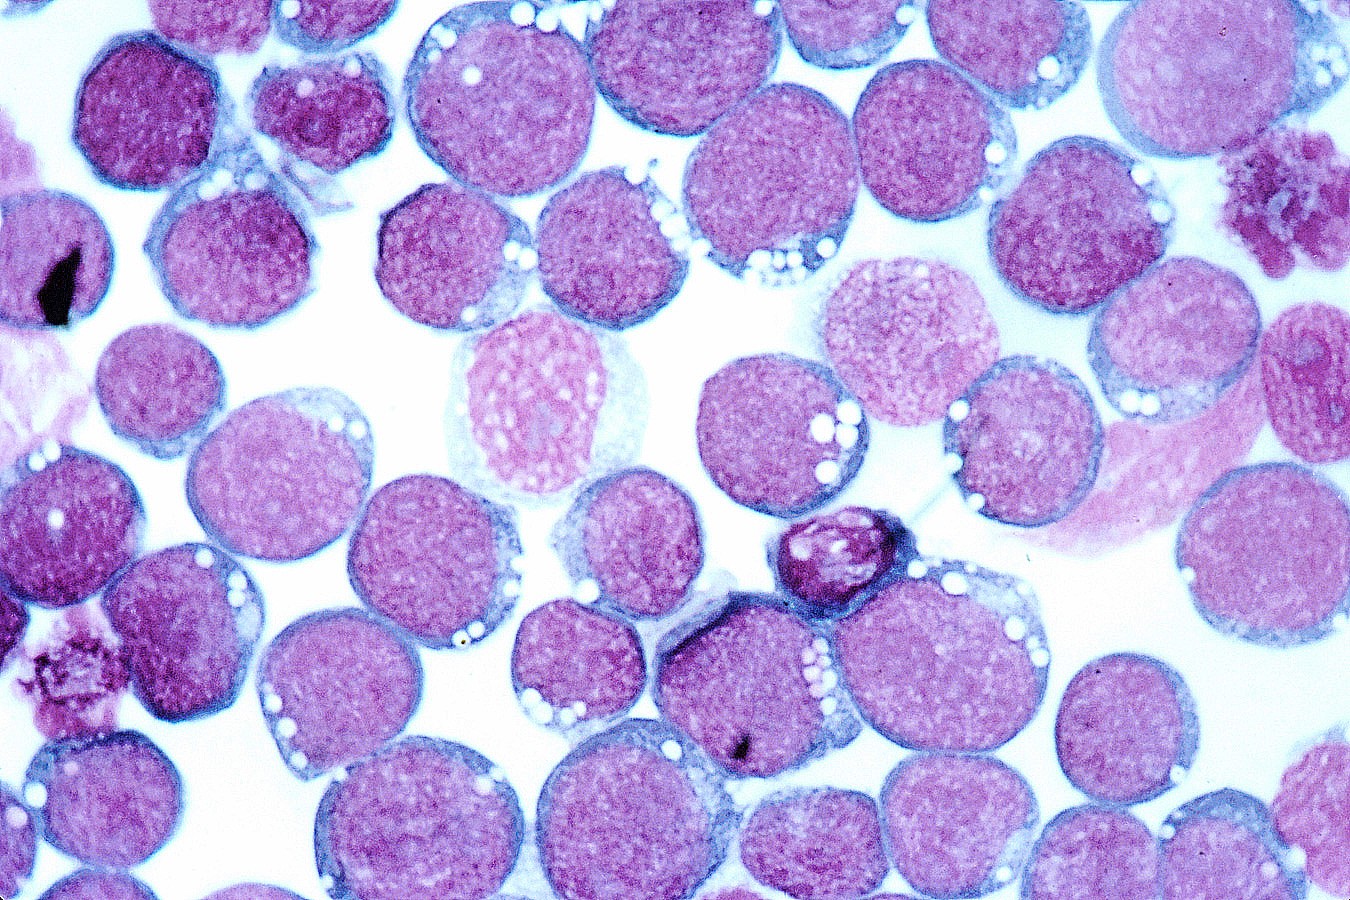 Cells stained purple on an enlarged microscope slide.